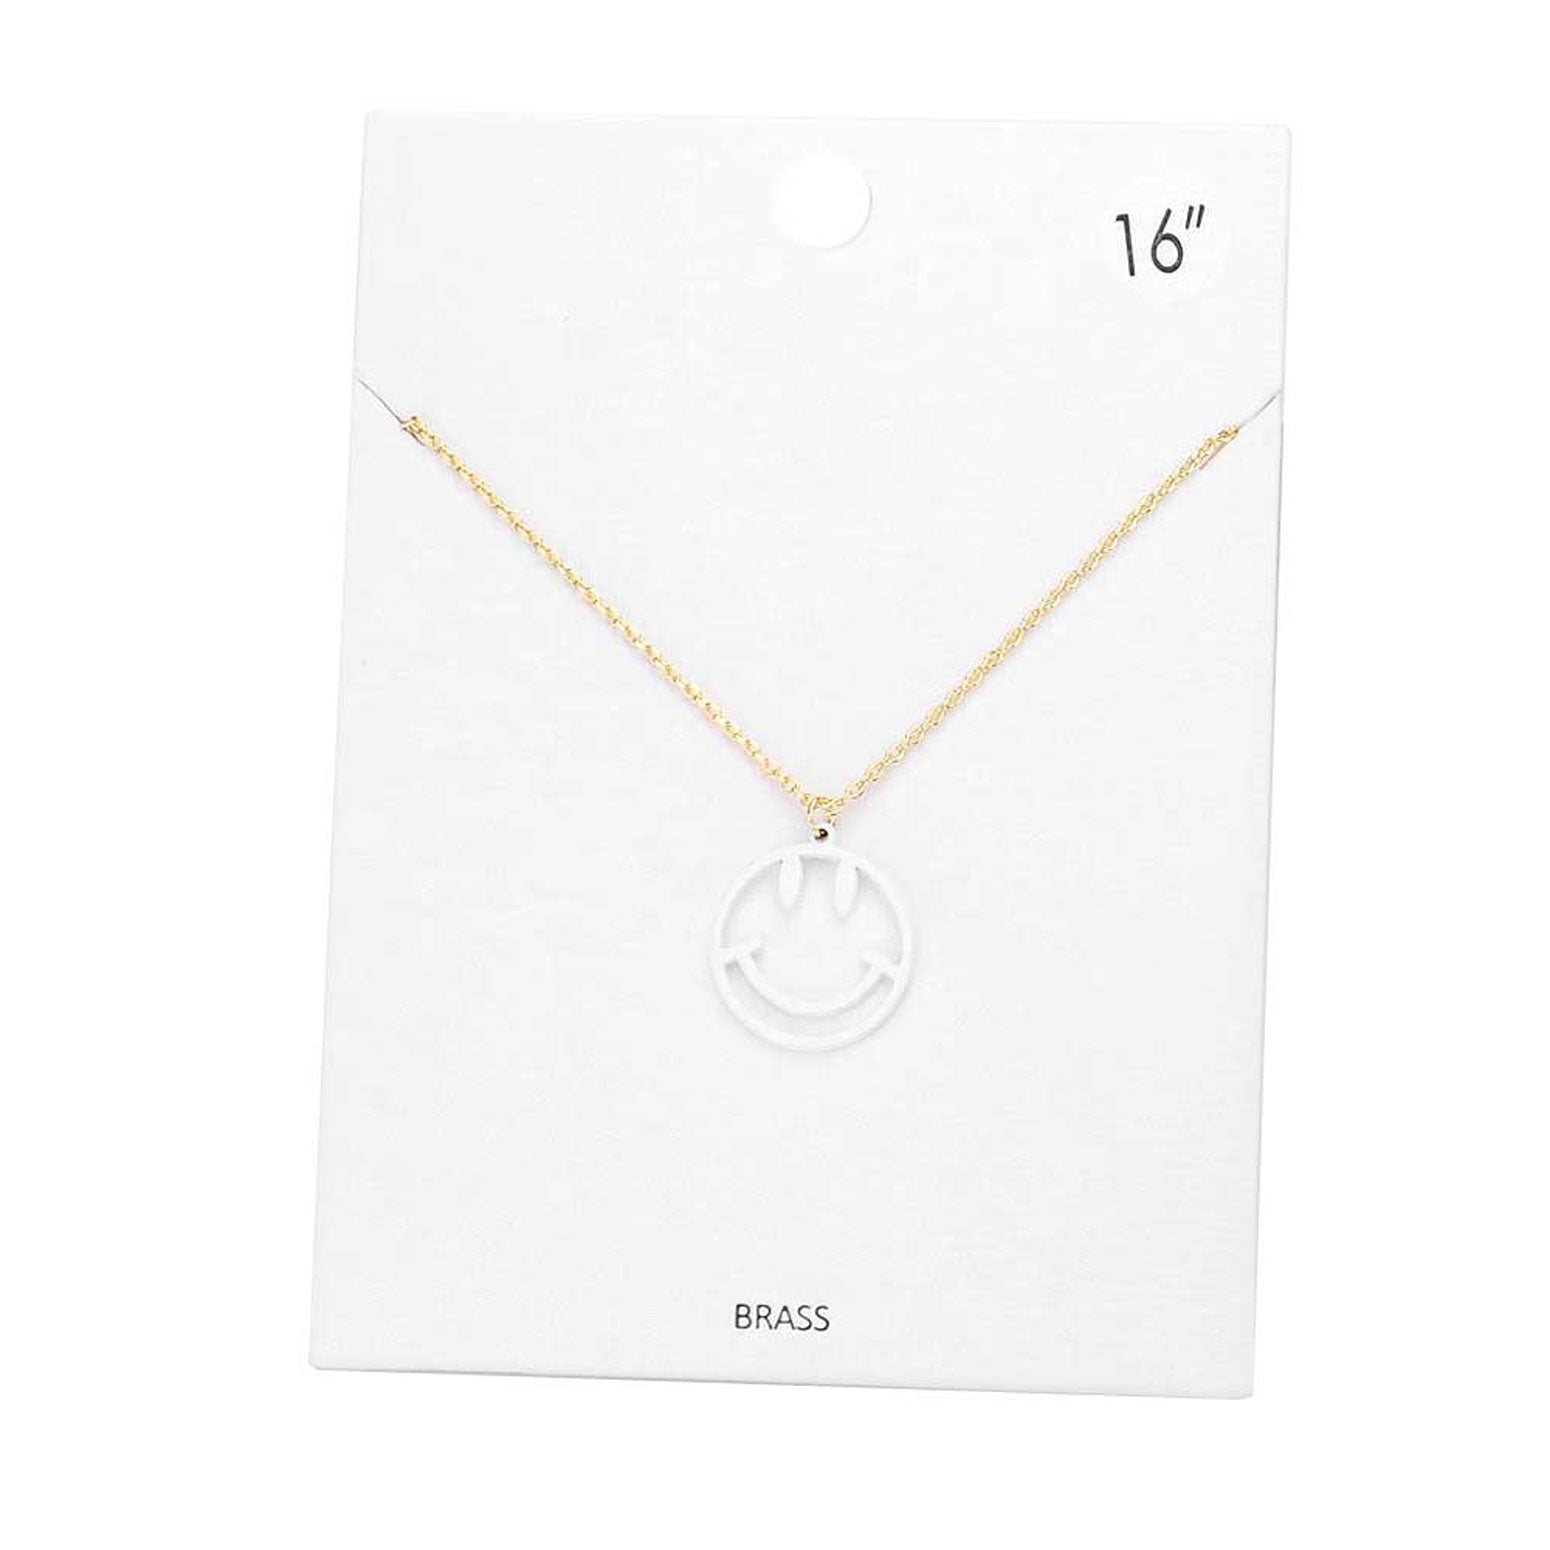 White Brass Metal Smile Pendant Necklace, Get ready with these Pendant Necklace, put on a pop of color to complete your ensemble. Perfect for adding just the right amount of shimmer & shine and a touch of class to special events. Perfect Birthday Gift, Anniversary Gift, Mother's Day Gift or any special occasion.